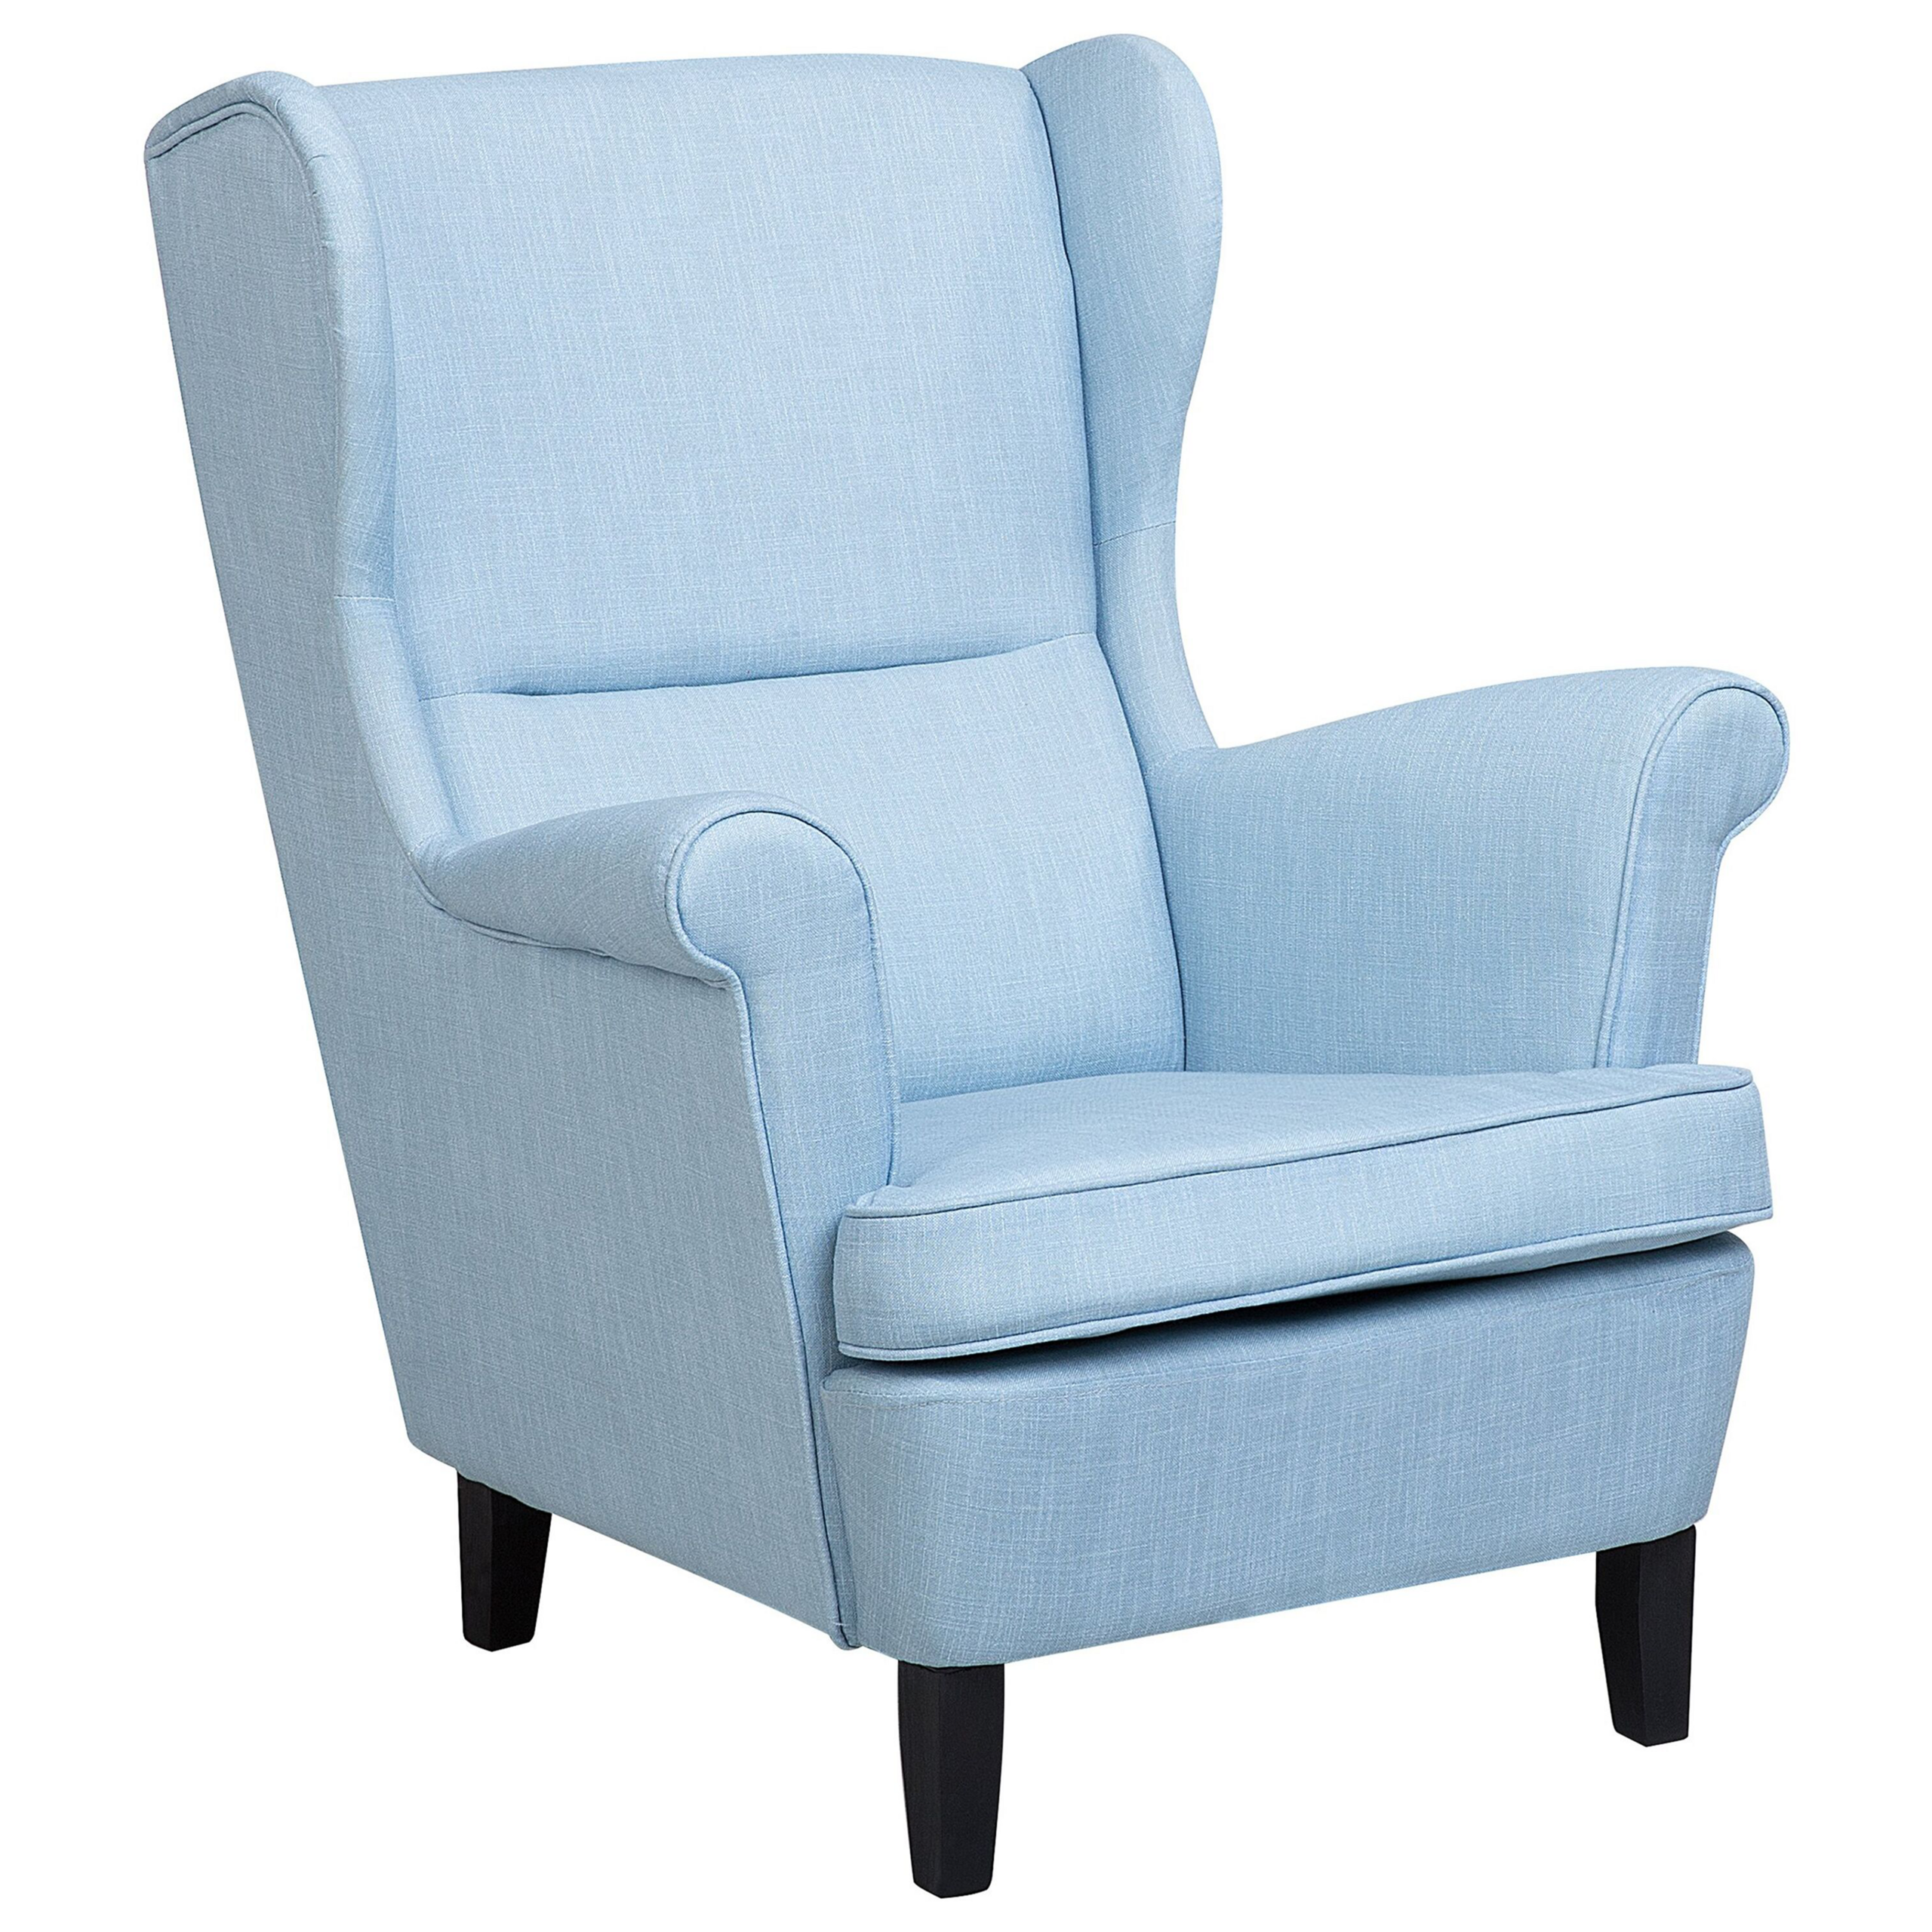 Beliani Wingback Chair Armchair Blue Fabric Upholstered Rolled Arms Retro